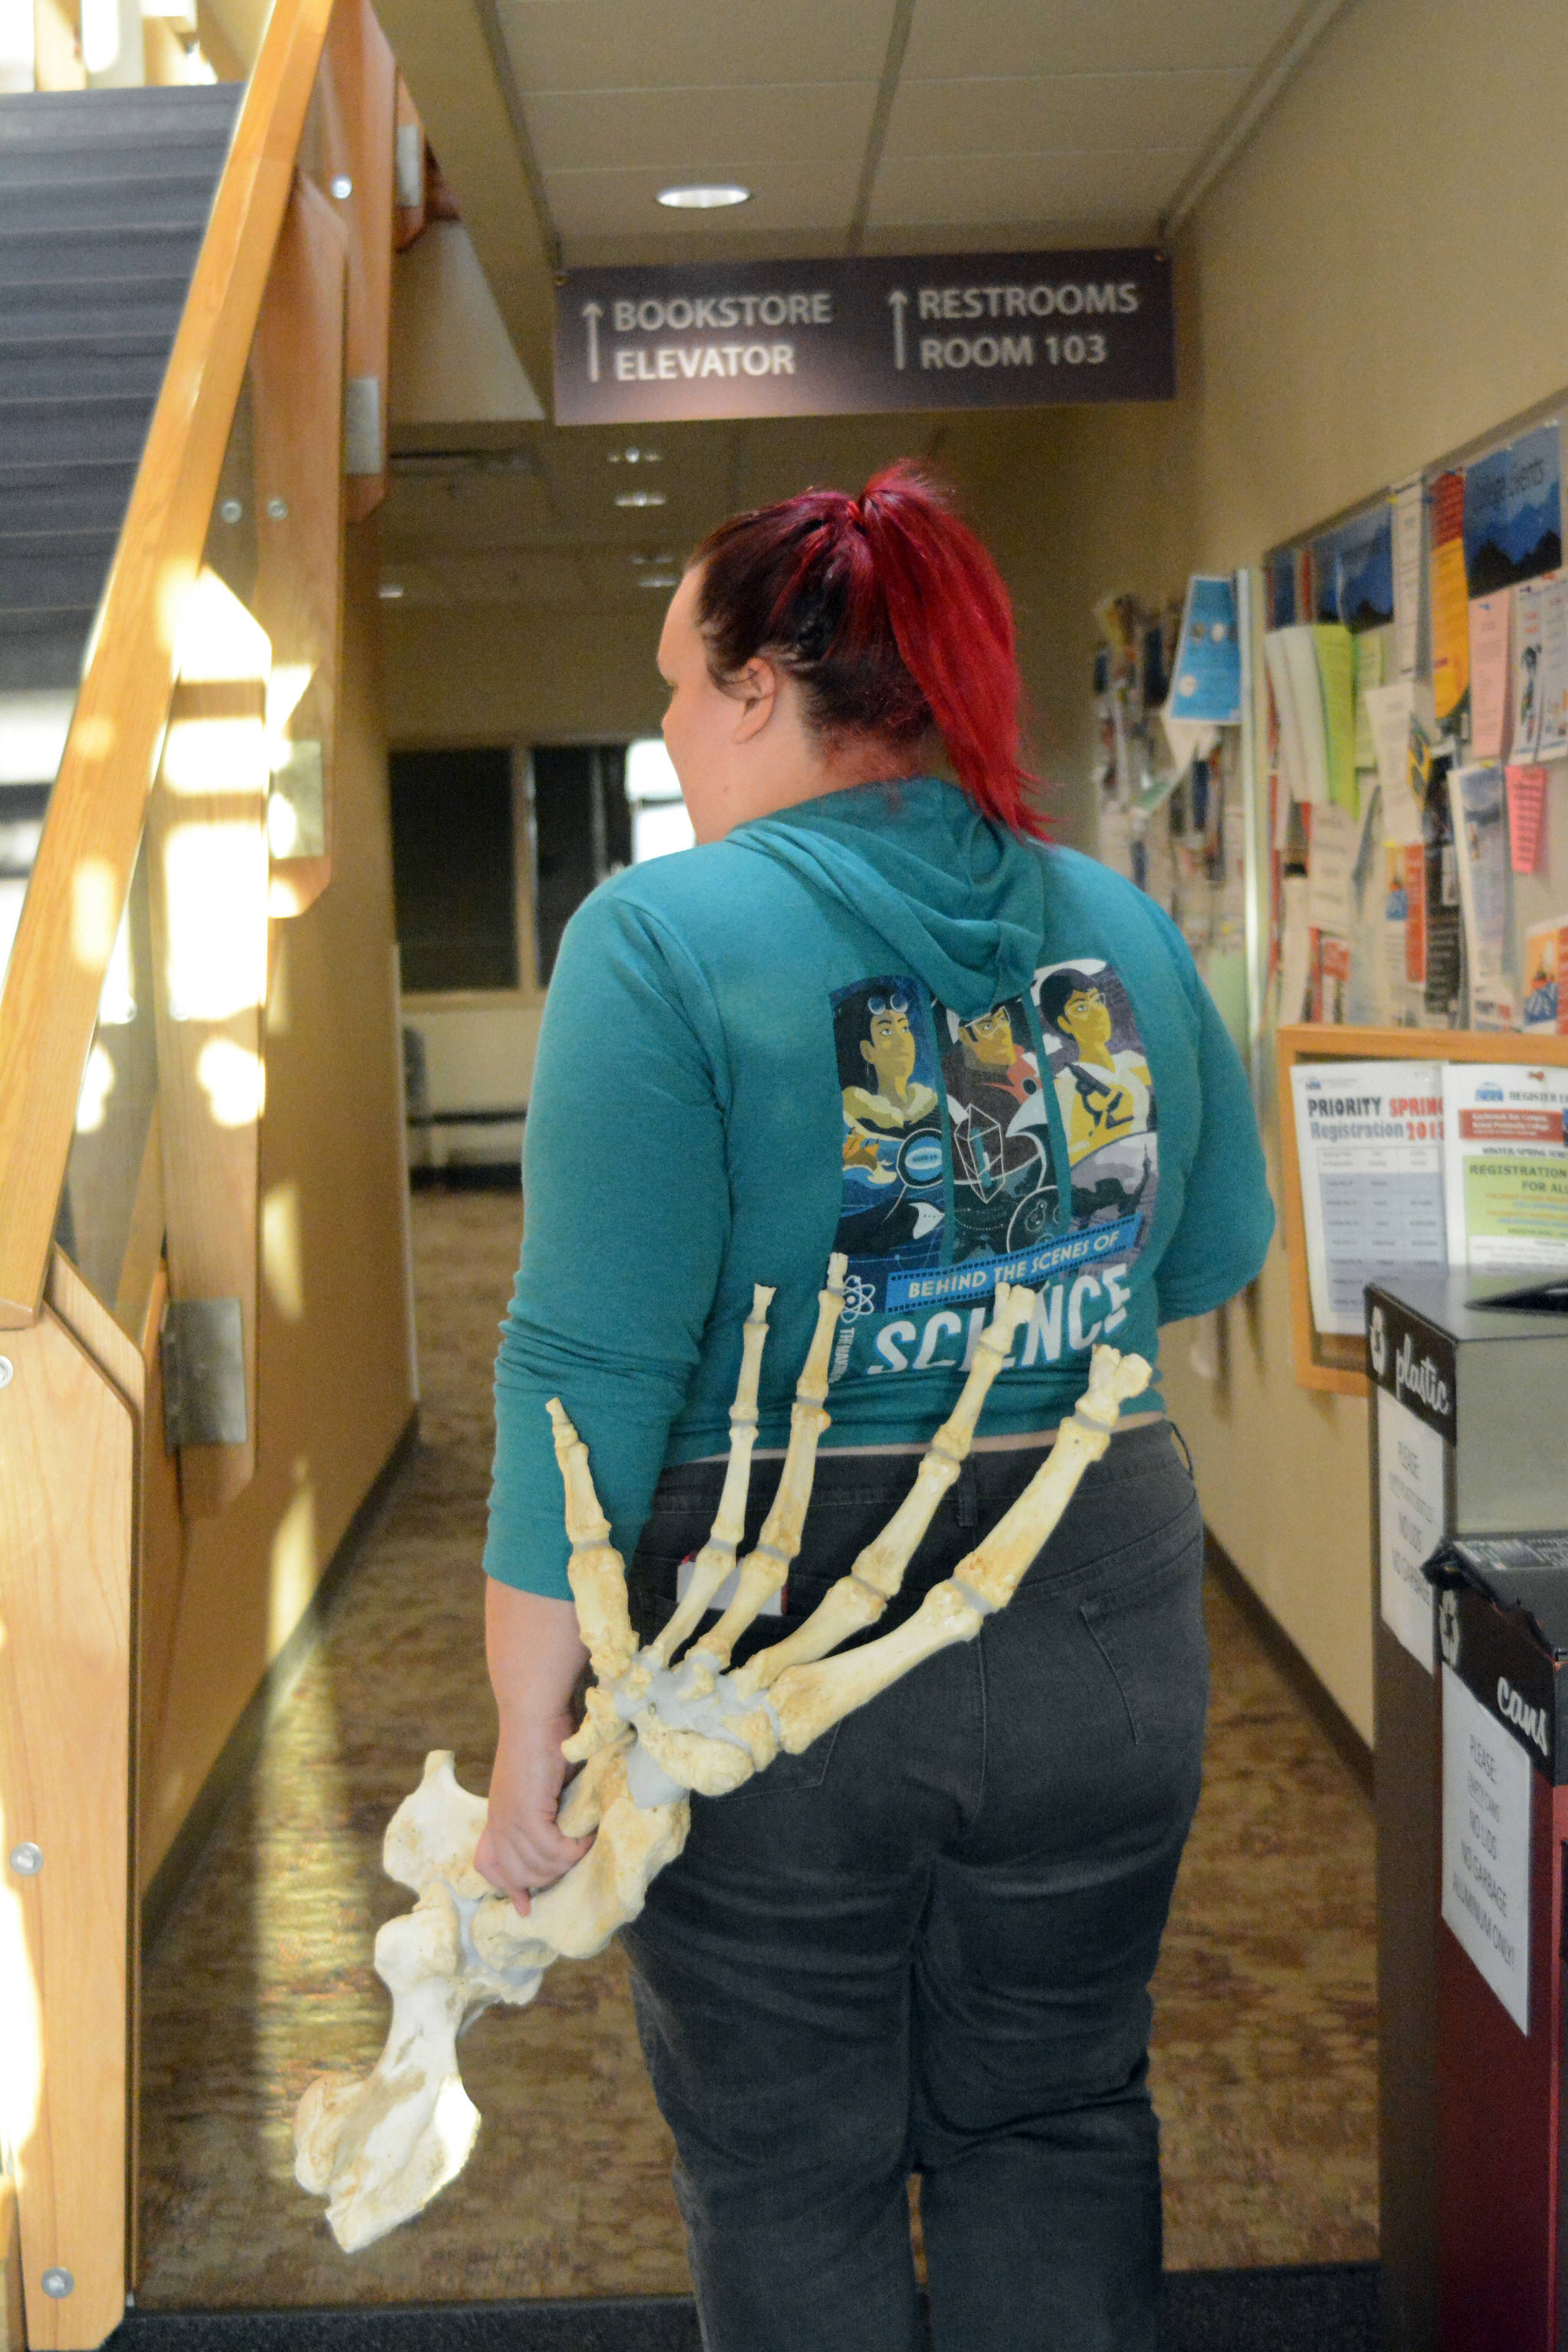 Zobeida Rutkin carries a flipper of Woody, a sea lion that lived at the Alaska SeaLife Center, Wednesday, Nov. 22, 2017 in Pioneer Hall of Kachemak Bay Campus in Homer, Alaska. Rutkin was a student in Lee Post’s Marine Skeleton Articulation class and helped put together the skeleton of Woody. (Photo by Michael Armstrong, Homer News)